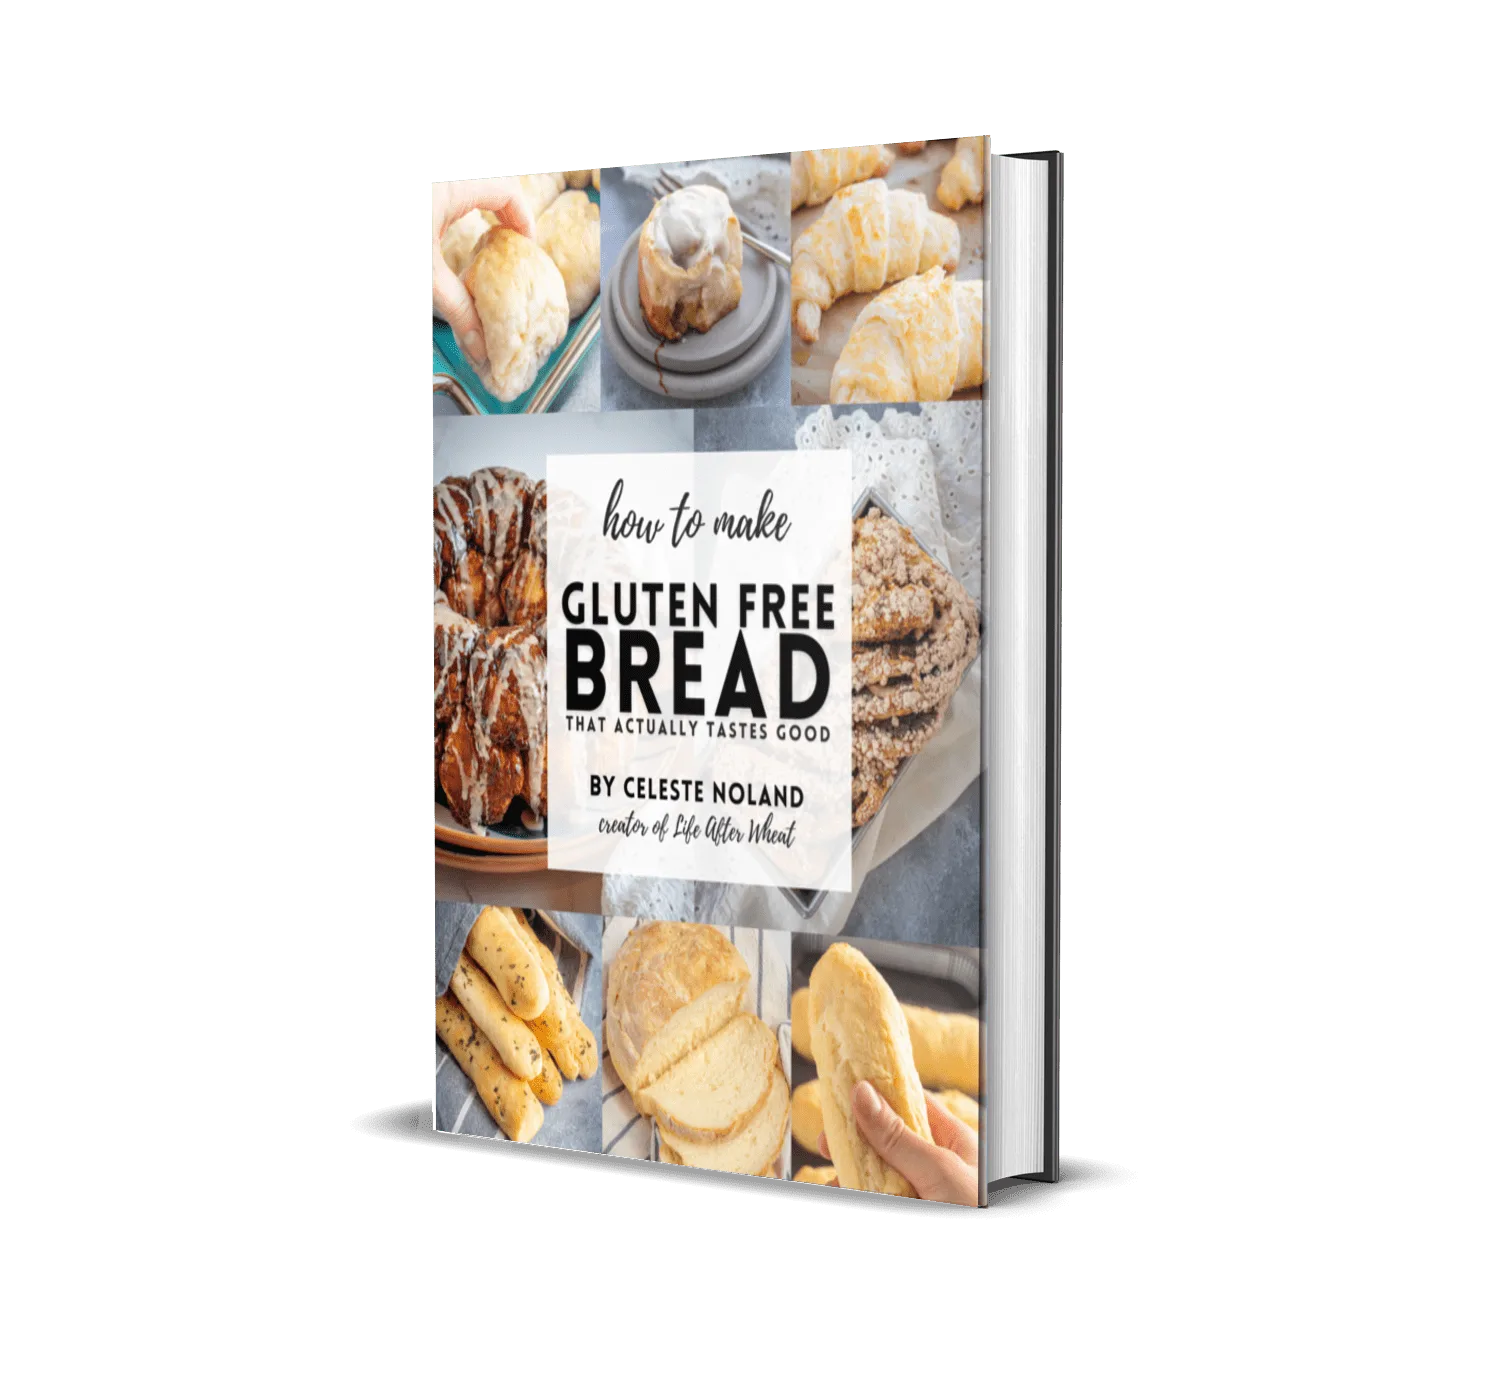 https://thereislifeafterwheat.com/wp-content/uploads/2021/12/3d-Cookbook-Cover.png.webp